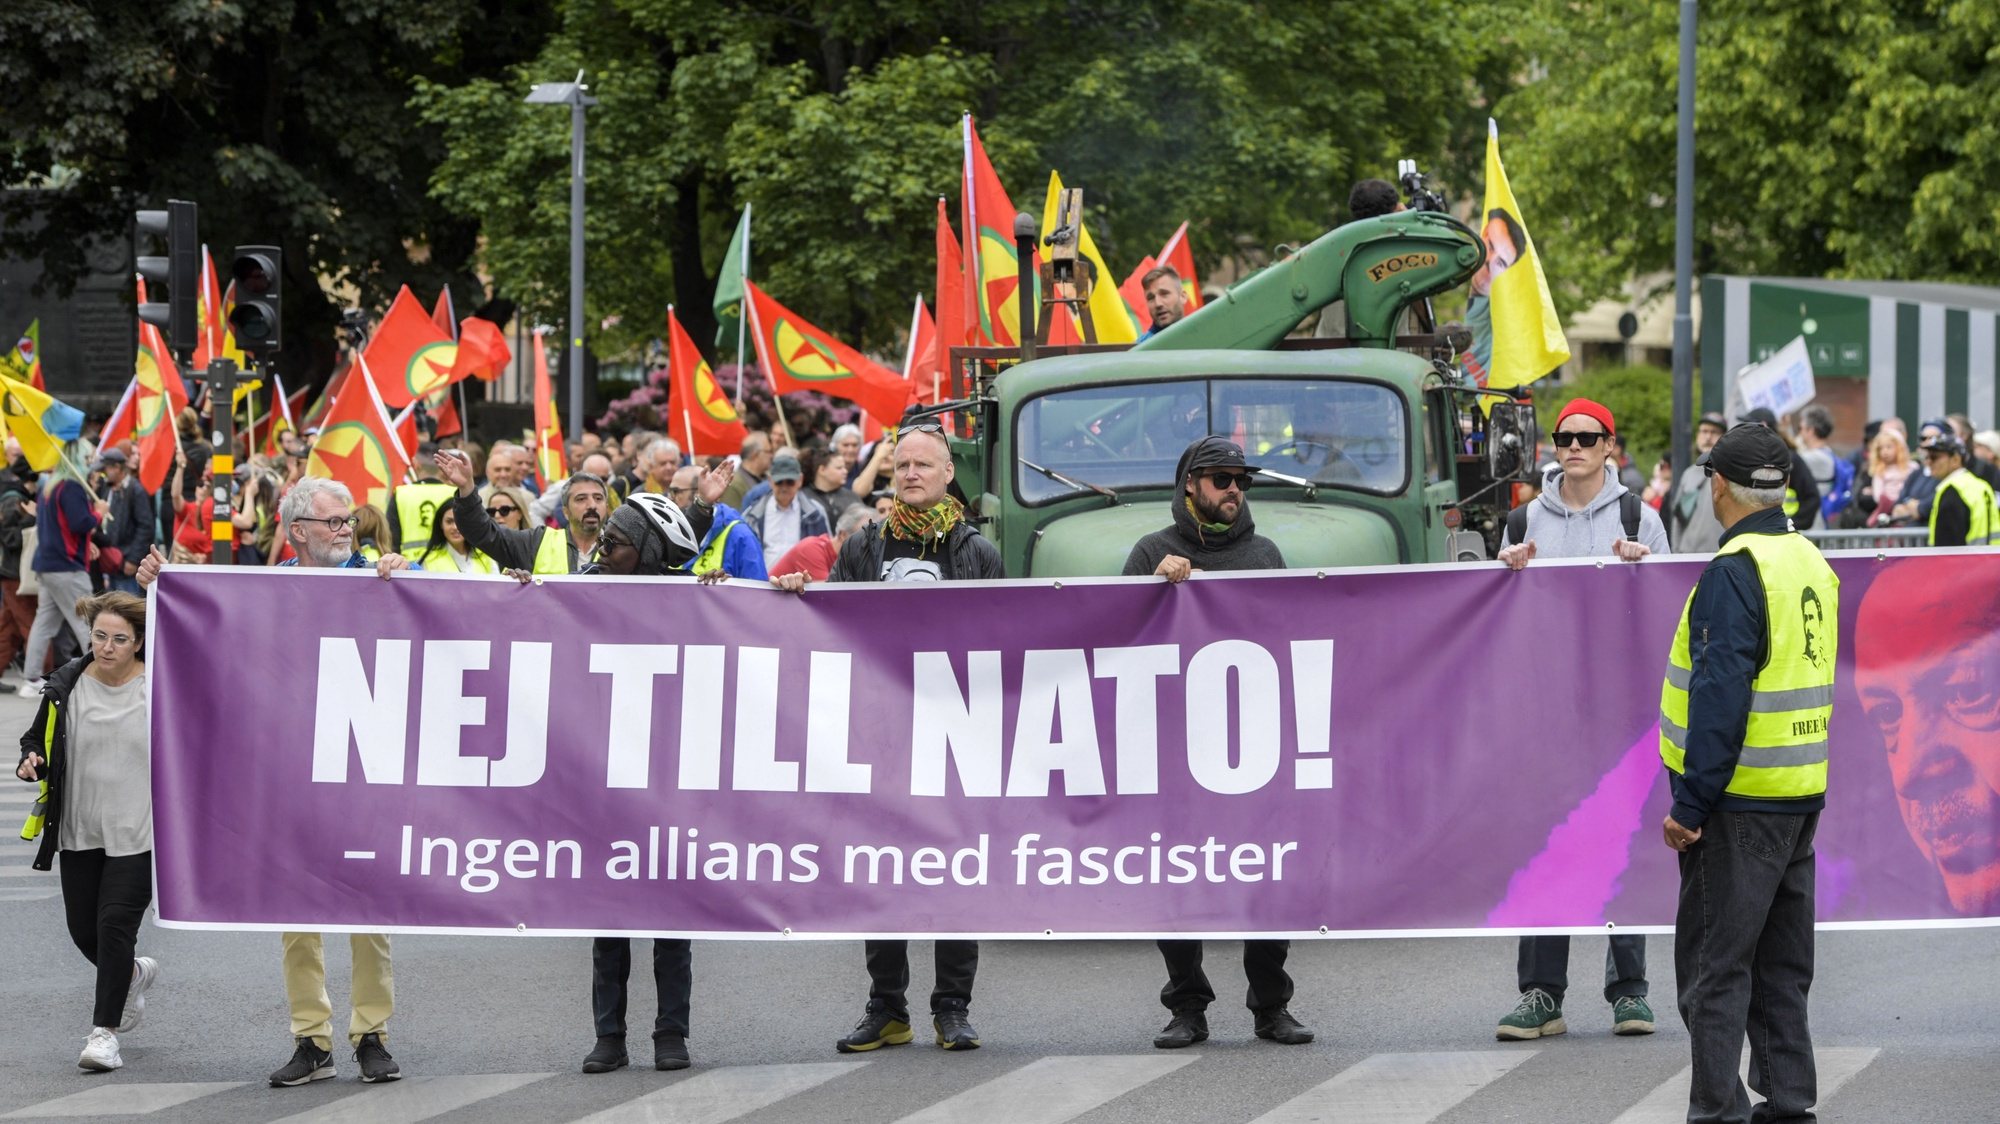 epa10672971 The Alliance Against NATO network stages a demonstration for freedom of speech, in support of democratic forces in Turkey, and against a Swedish NATO membership in Stockholm, Sweden, 04 June 2023. Finland submitted it application to join NATO following Russia&#039;s invasion of Ukraine in 2022. The banner reads &#039;No to NATO! - no alliance with fascists&#039;.  EPA/Maja Suslin/TT  SWEDEN OUT